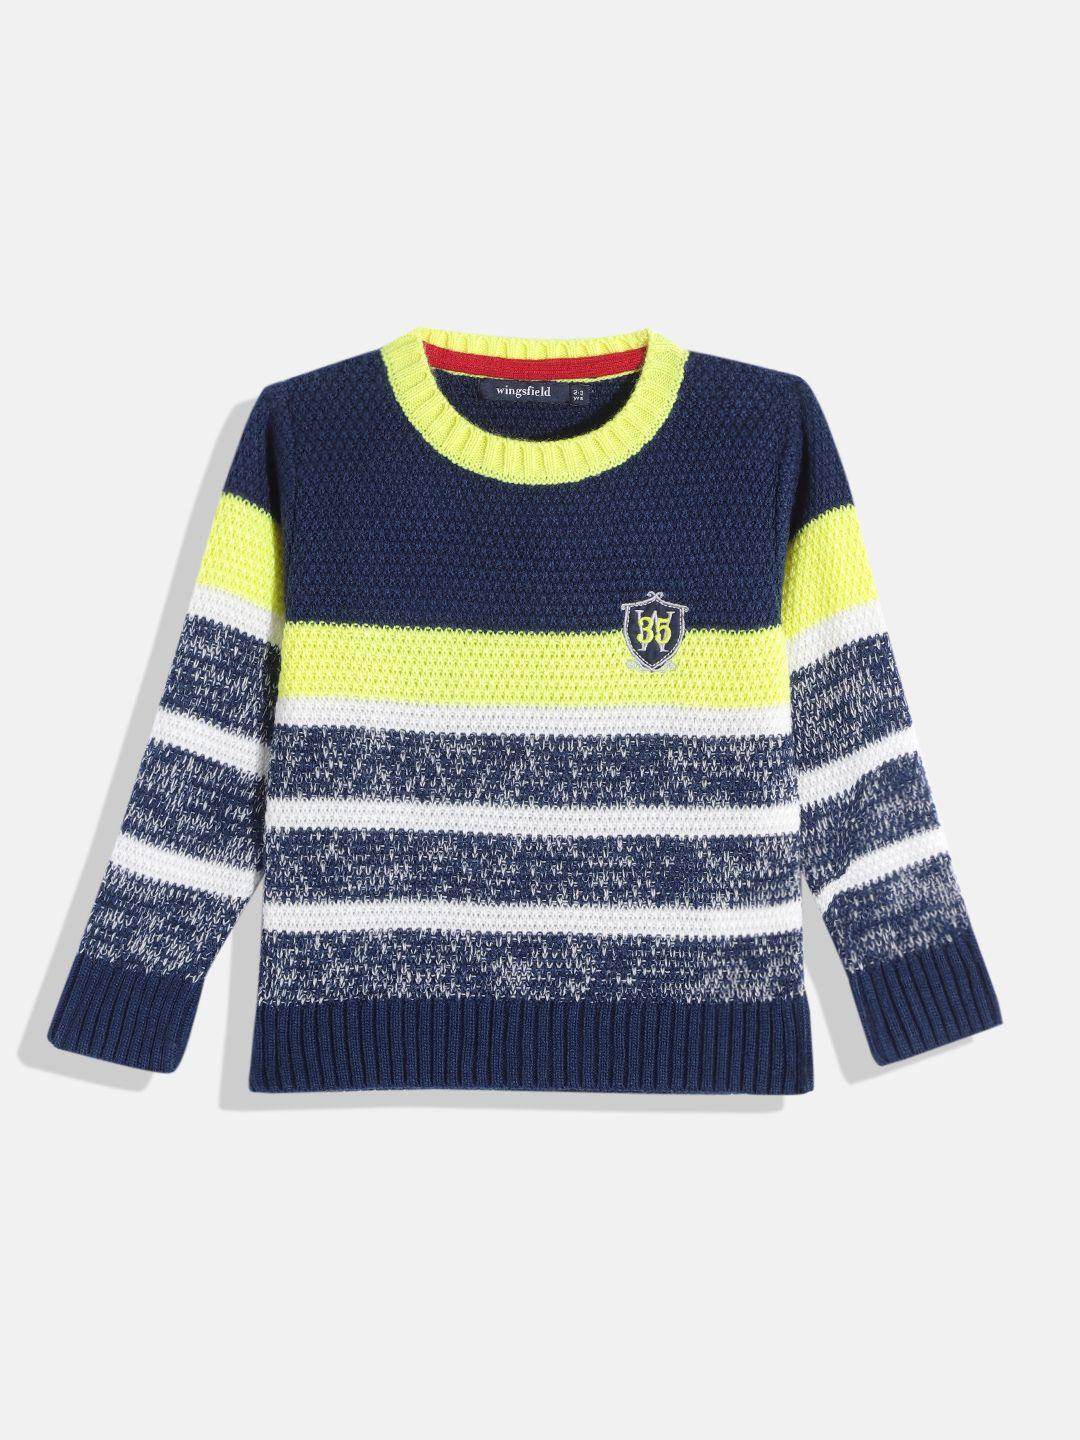 wingsfield boys navy blue & white striped pullover